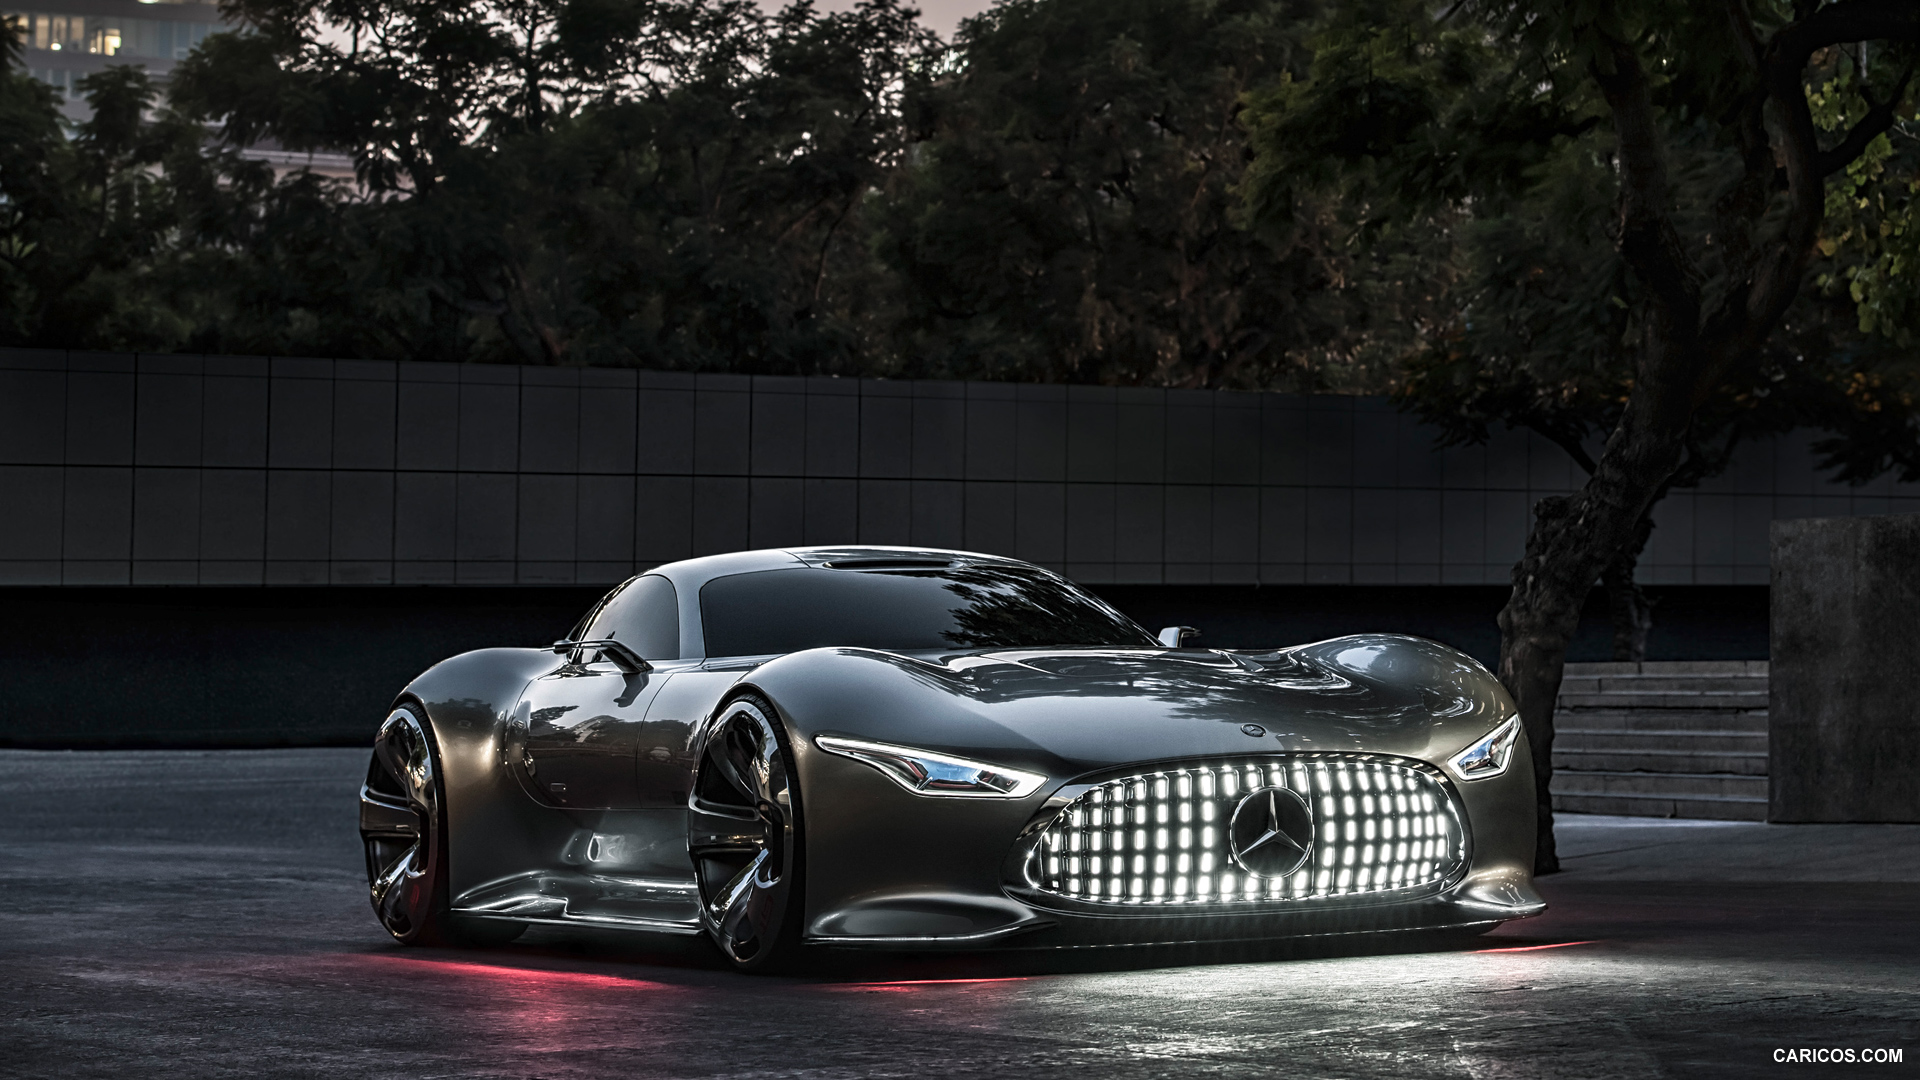 Mercedes-Benz AMG Vision Gran Turismo Concept (2013)  - Front, #4 of 25